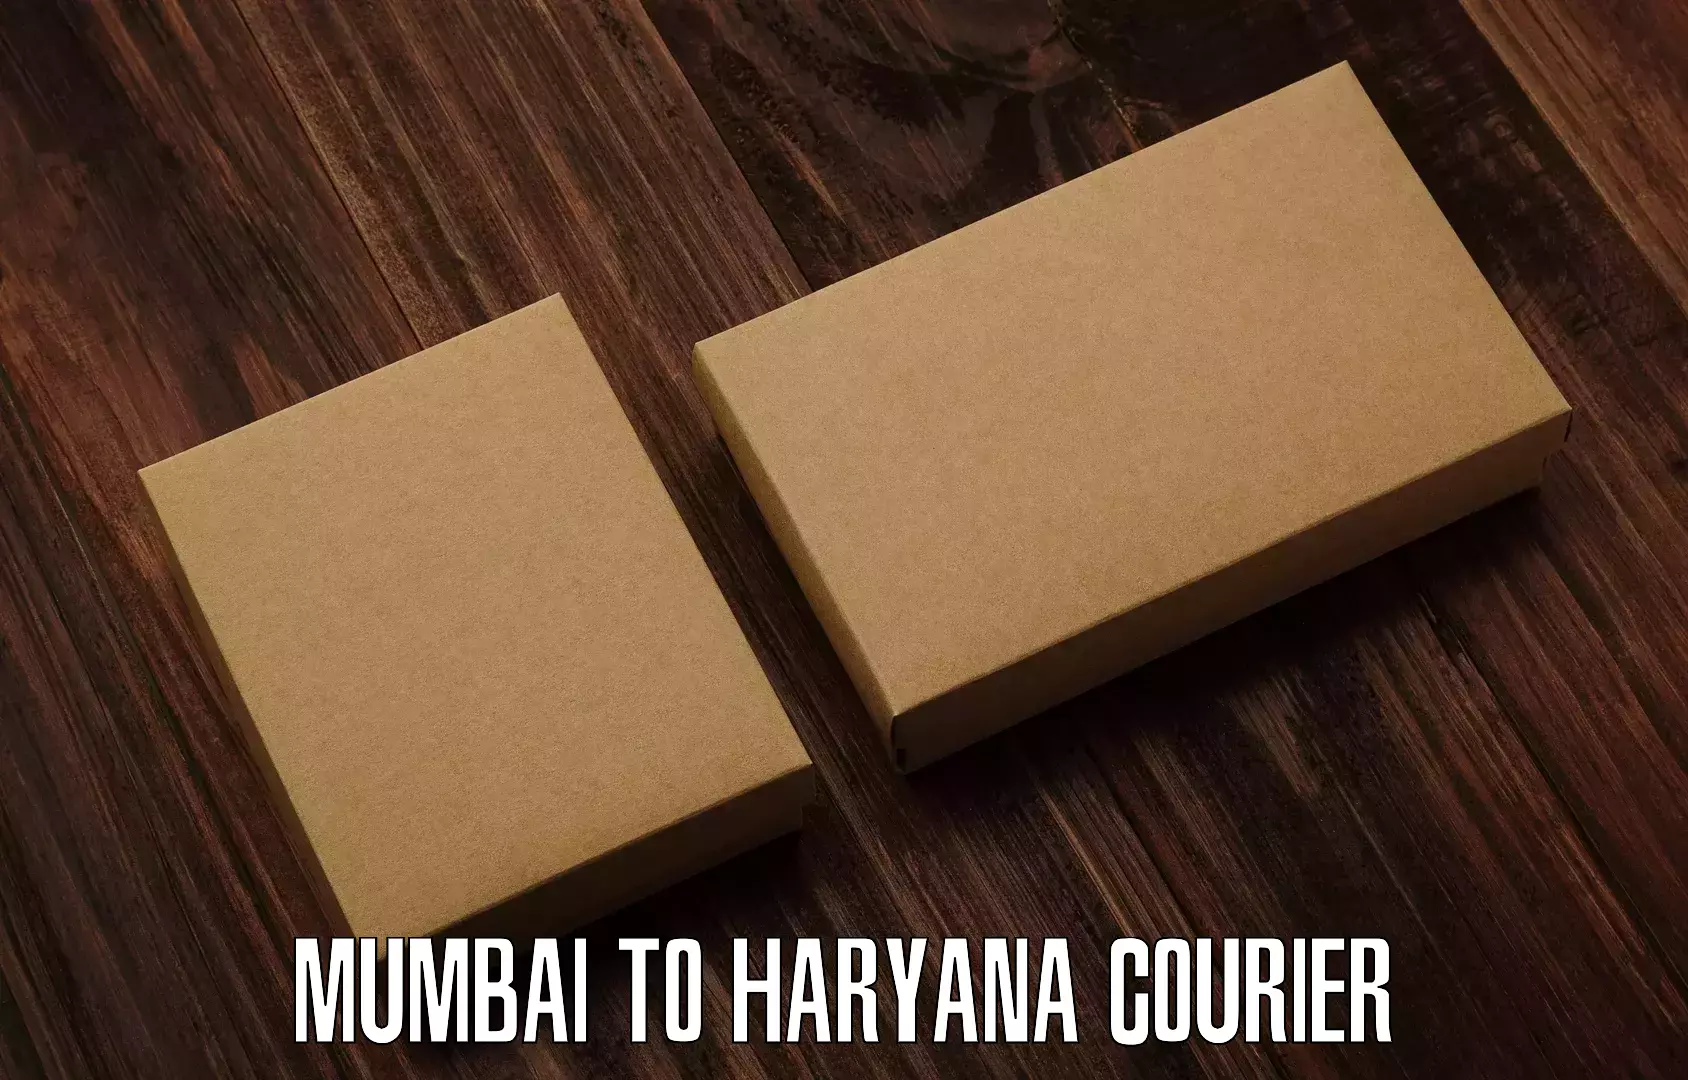 User-friendly delivery service Mumbai to Hisar